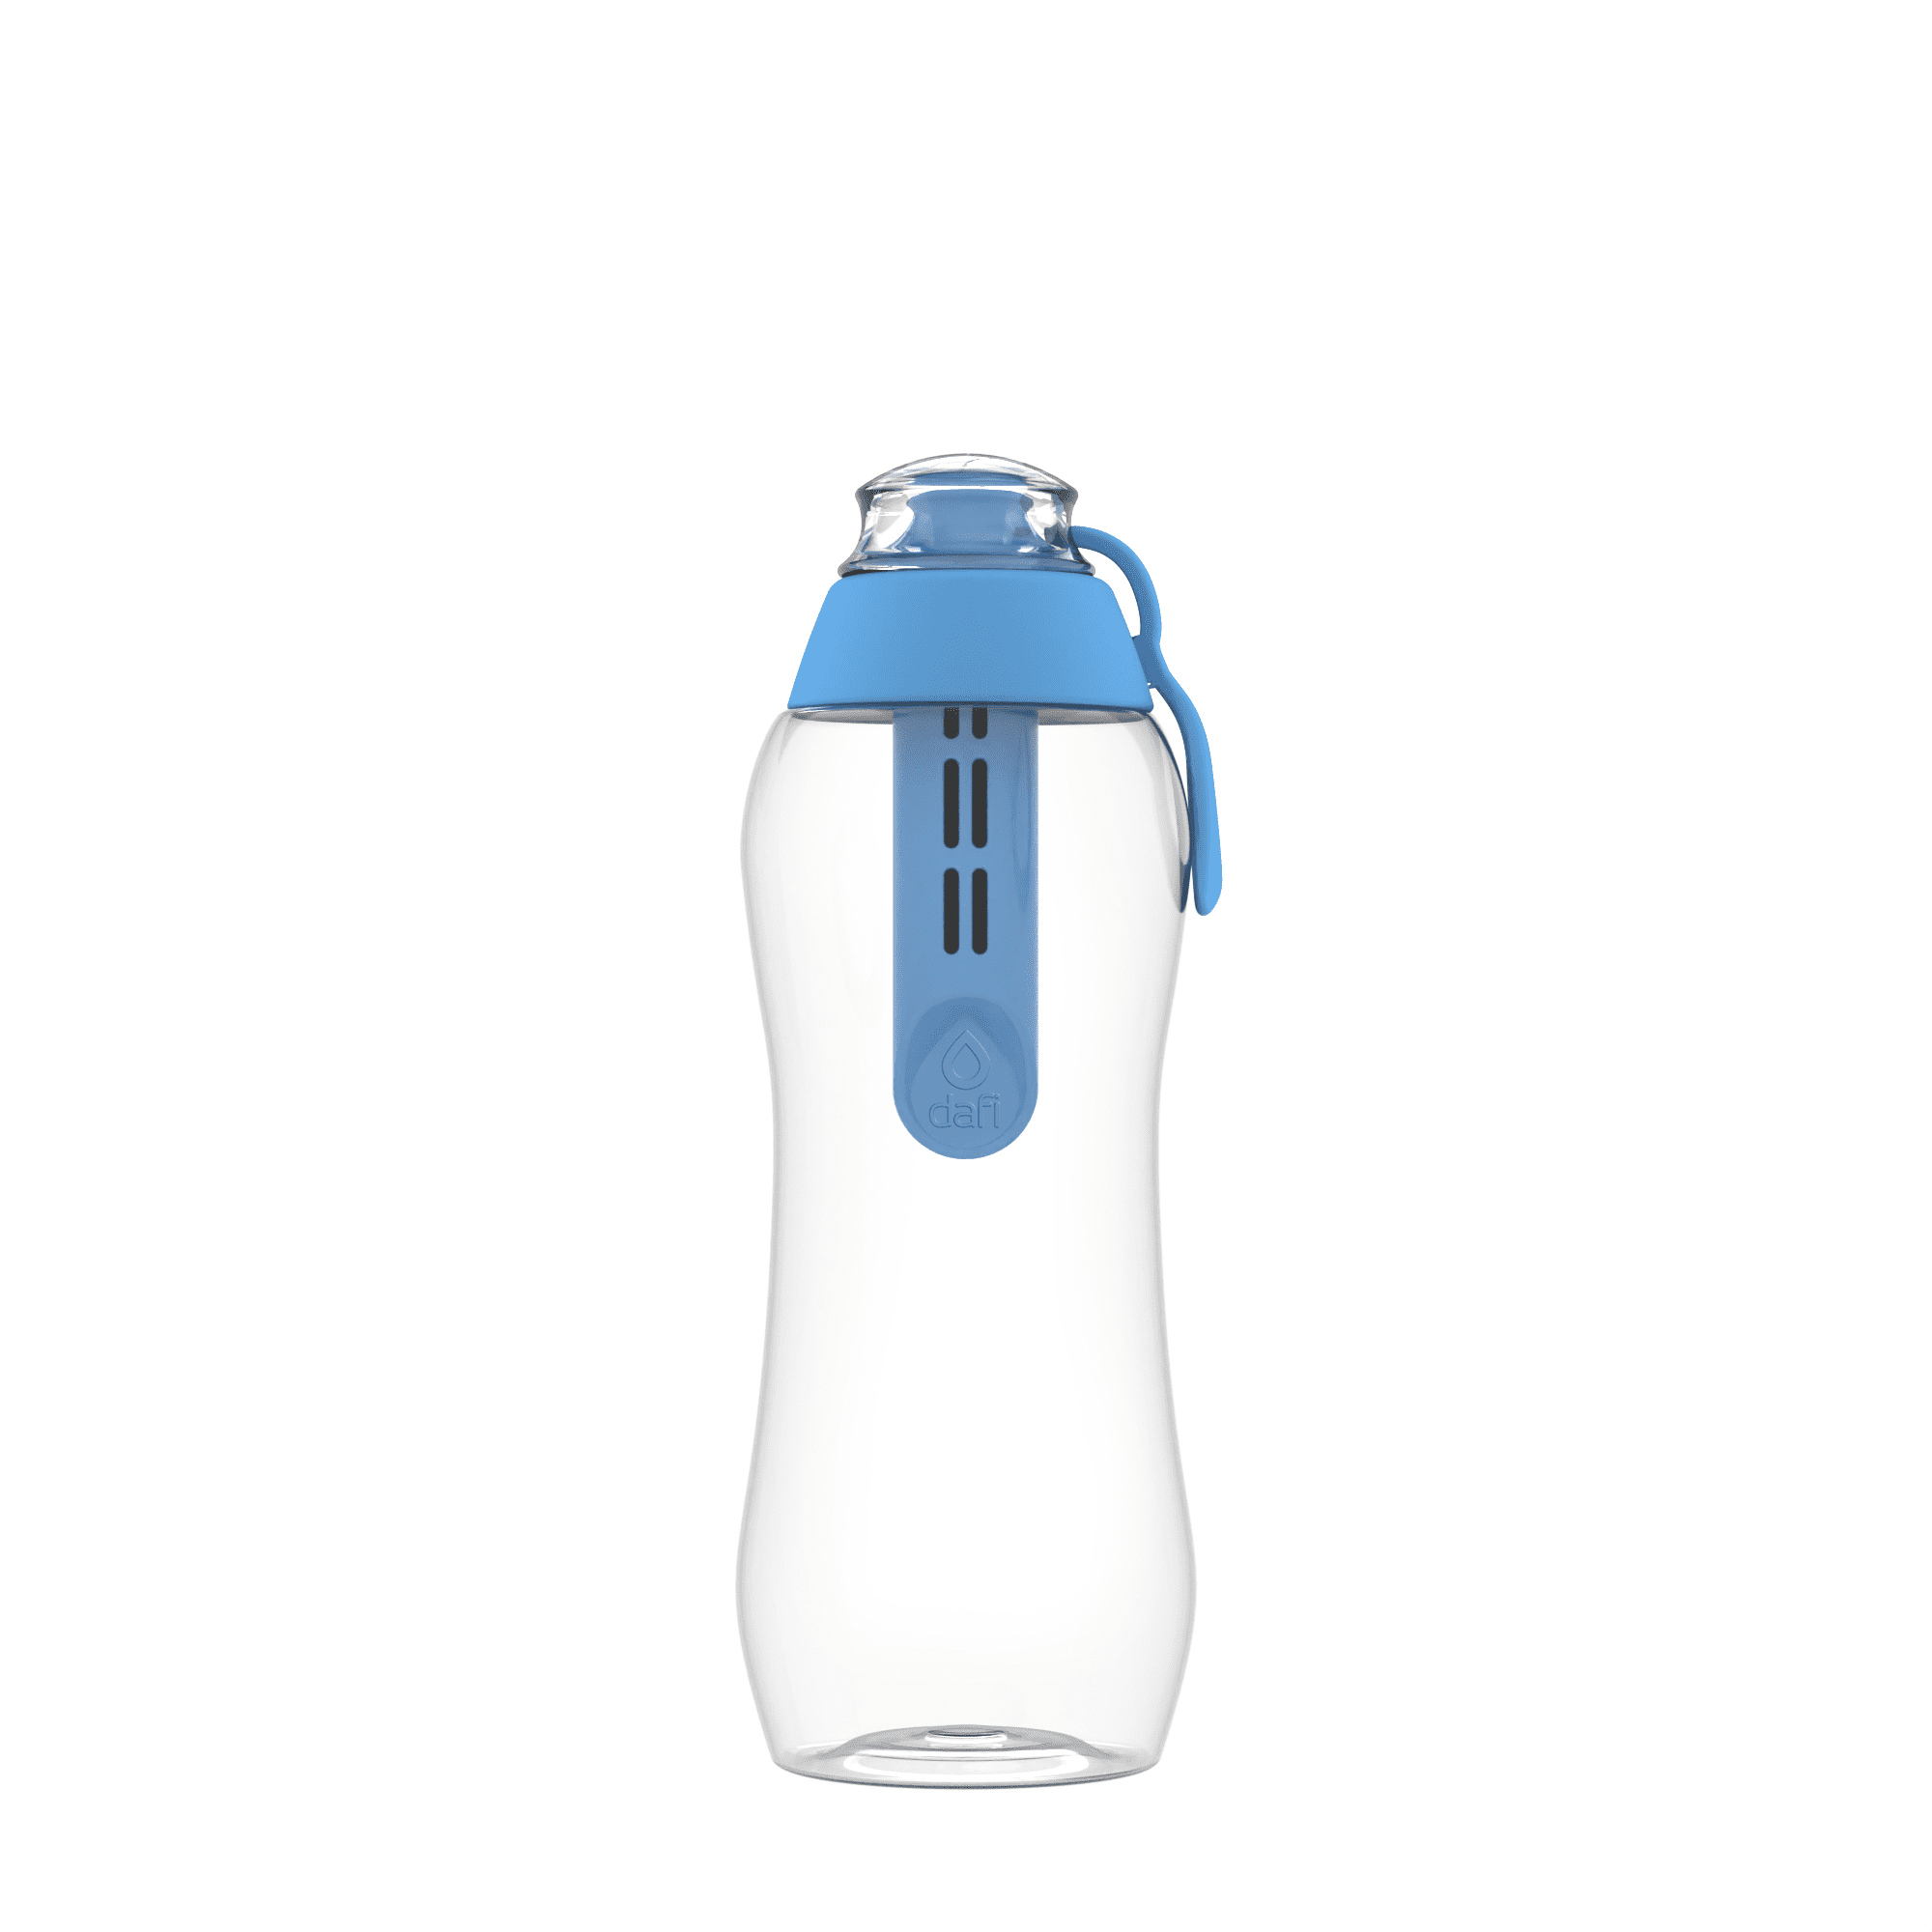  Cirkull 22oz Plastic Water Bottle with Blue Lid and 5 Flavor  Cartridges Variety Delicious (Fruit Punch - Mixed Berry - Random Tea Flavor  - 2 Random Flyte Flavor) : Sports & Outdoors